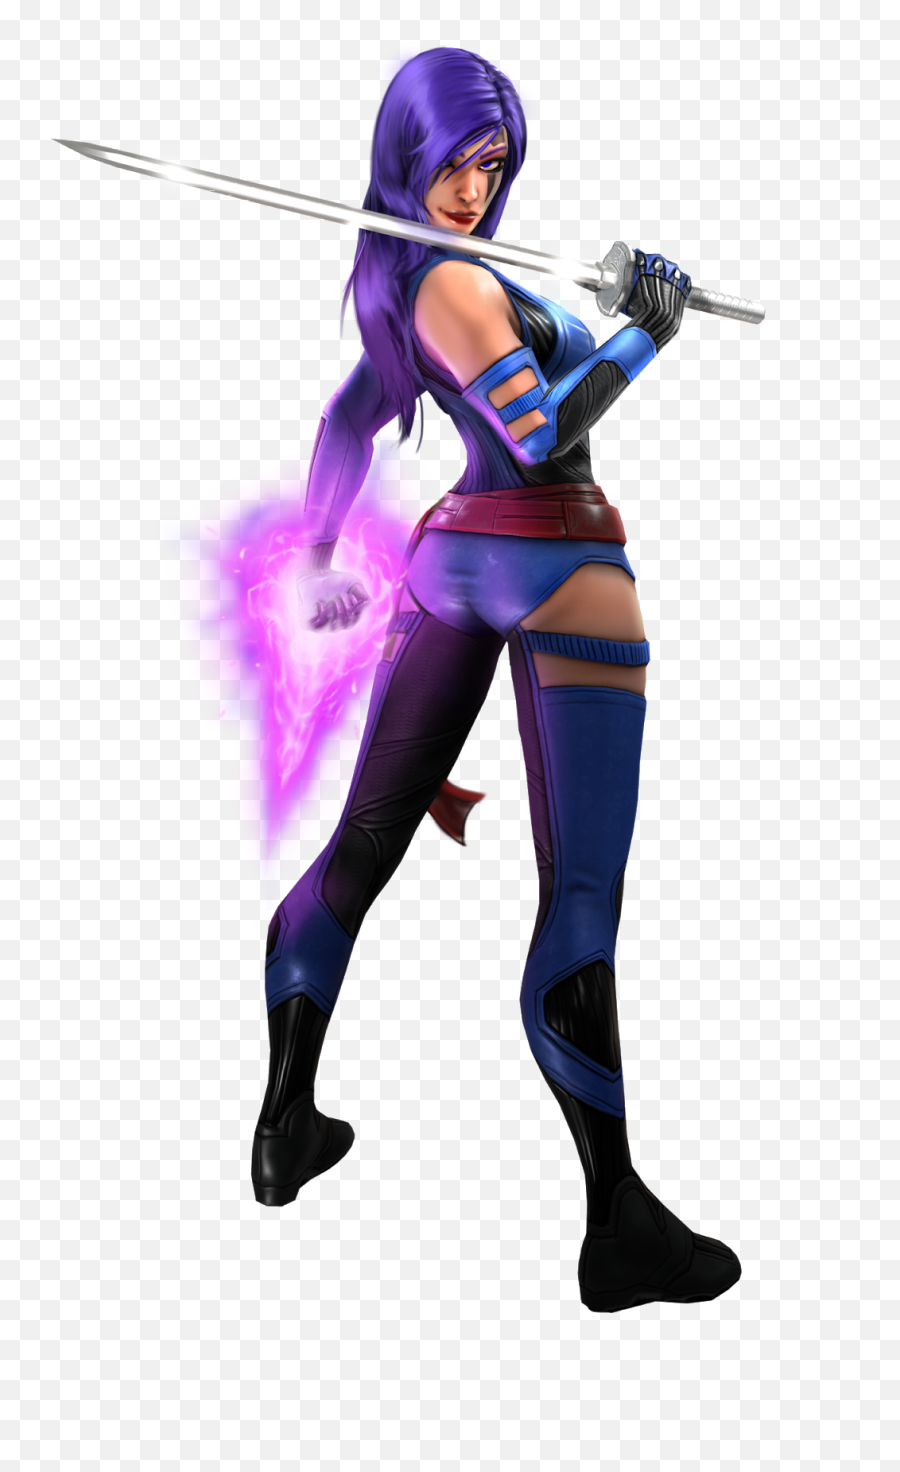 Psylocke Captain Britain Like A Butterfly May 2019 - Fictional Character Emoji,Emma Frost I Have No Emotion